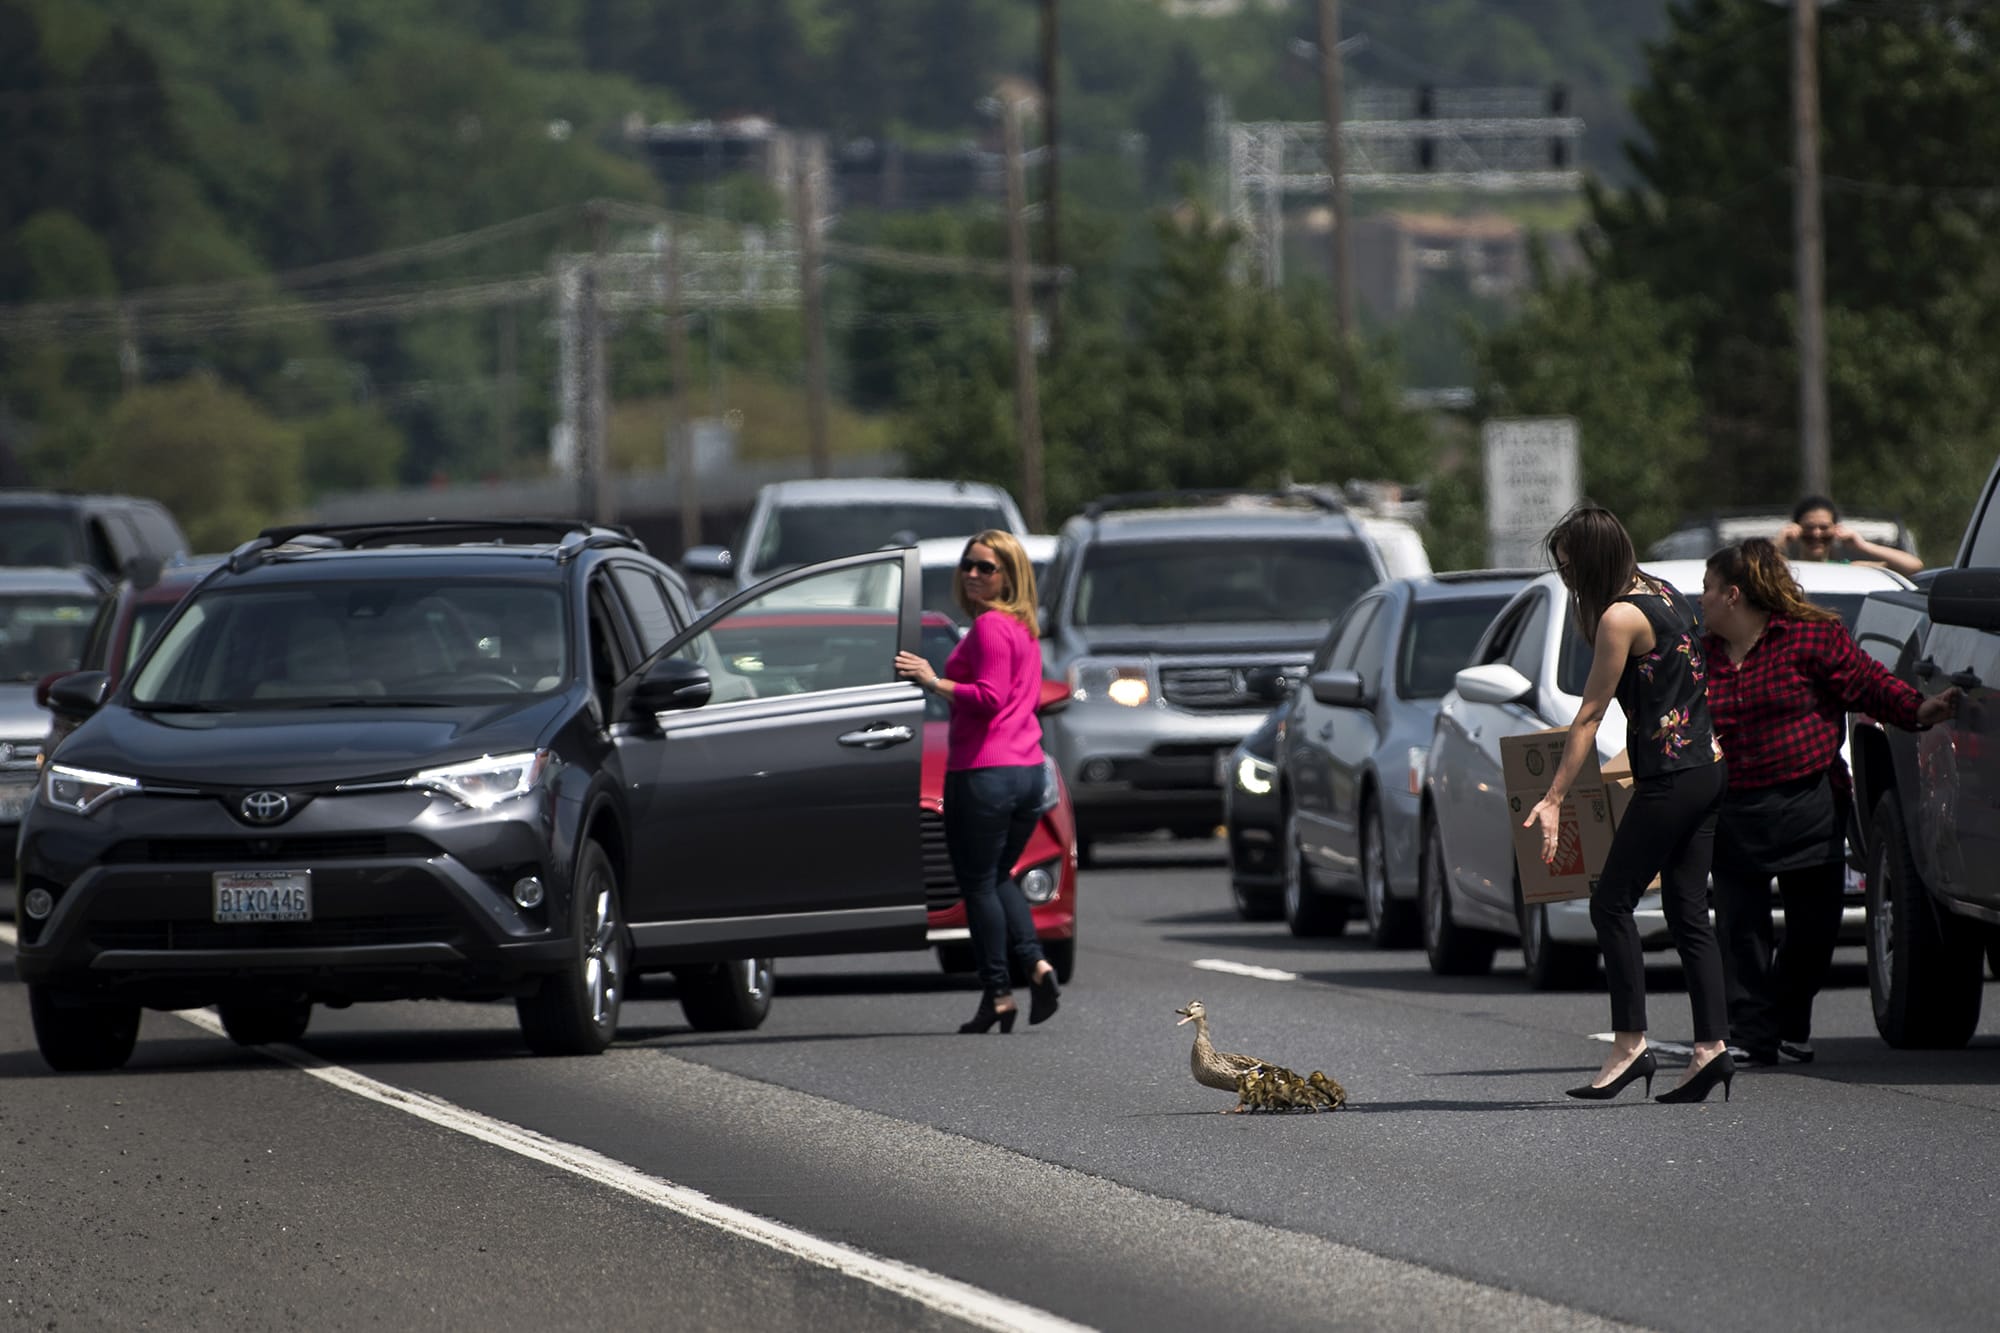 A mama mallard and her eight ducklings stopped traffic on Highway 14 near Columbia House Boulevard on Friday afternoon as they successfully negotiated crossing the busy freeway with the help of several Samaritans. Like the proverbial chicken, there was no straight answer to why the duck wanted to cross the road, but everyone was safe.